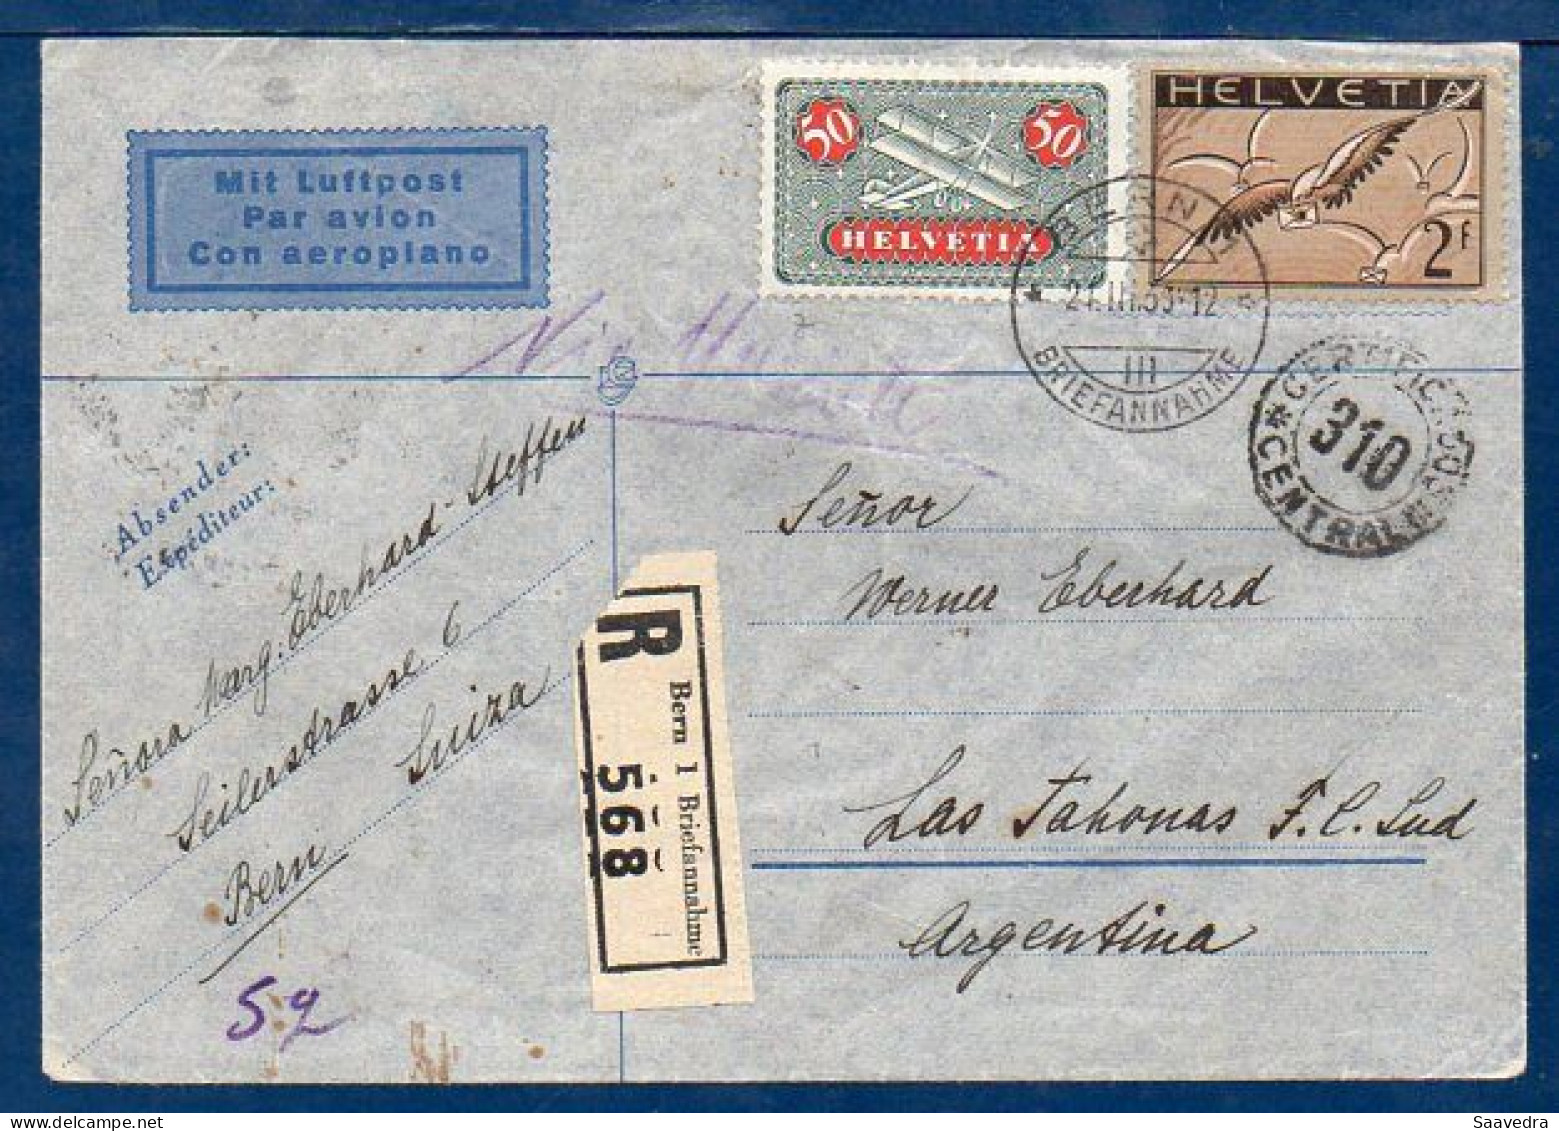 Switzerland To Argentina, 1936, Via Air France  (008) - Airmail